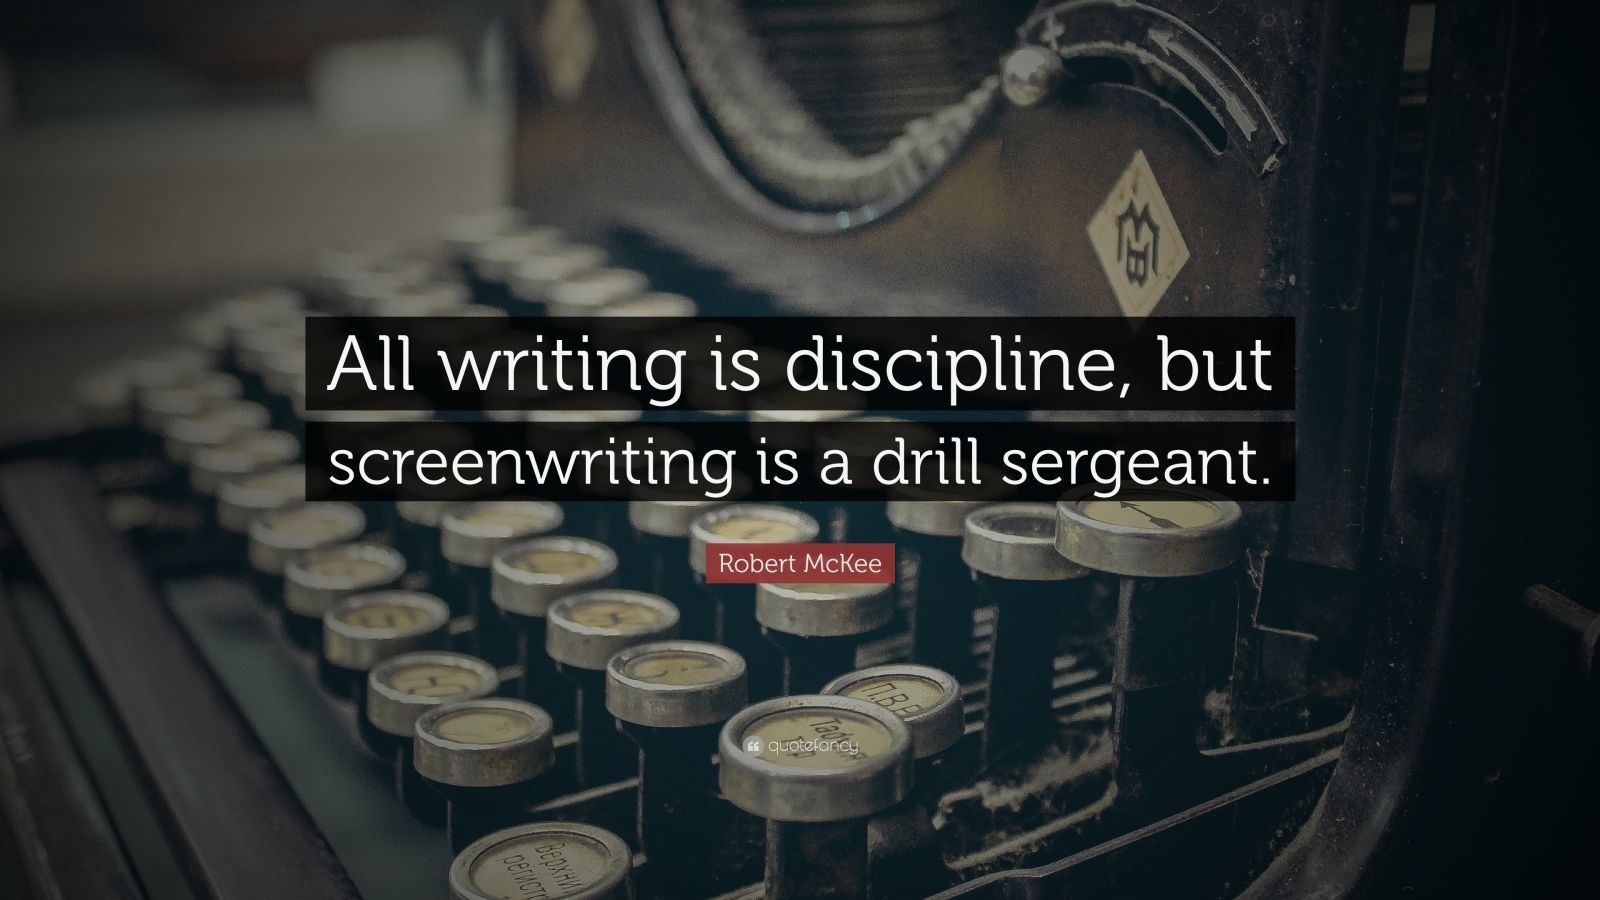 Robert McKee Quote: “All writing is discipline, but screenwriting